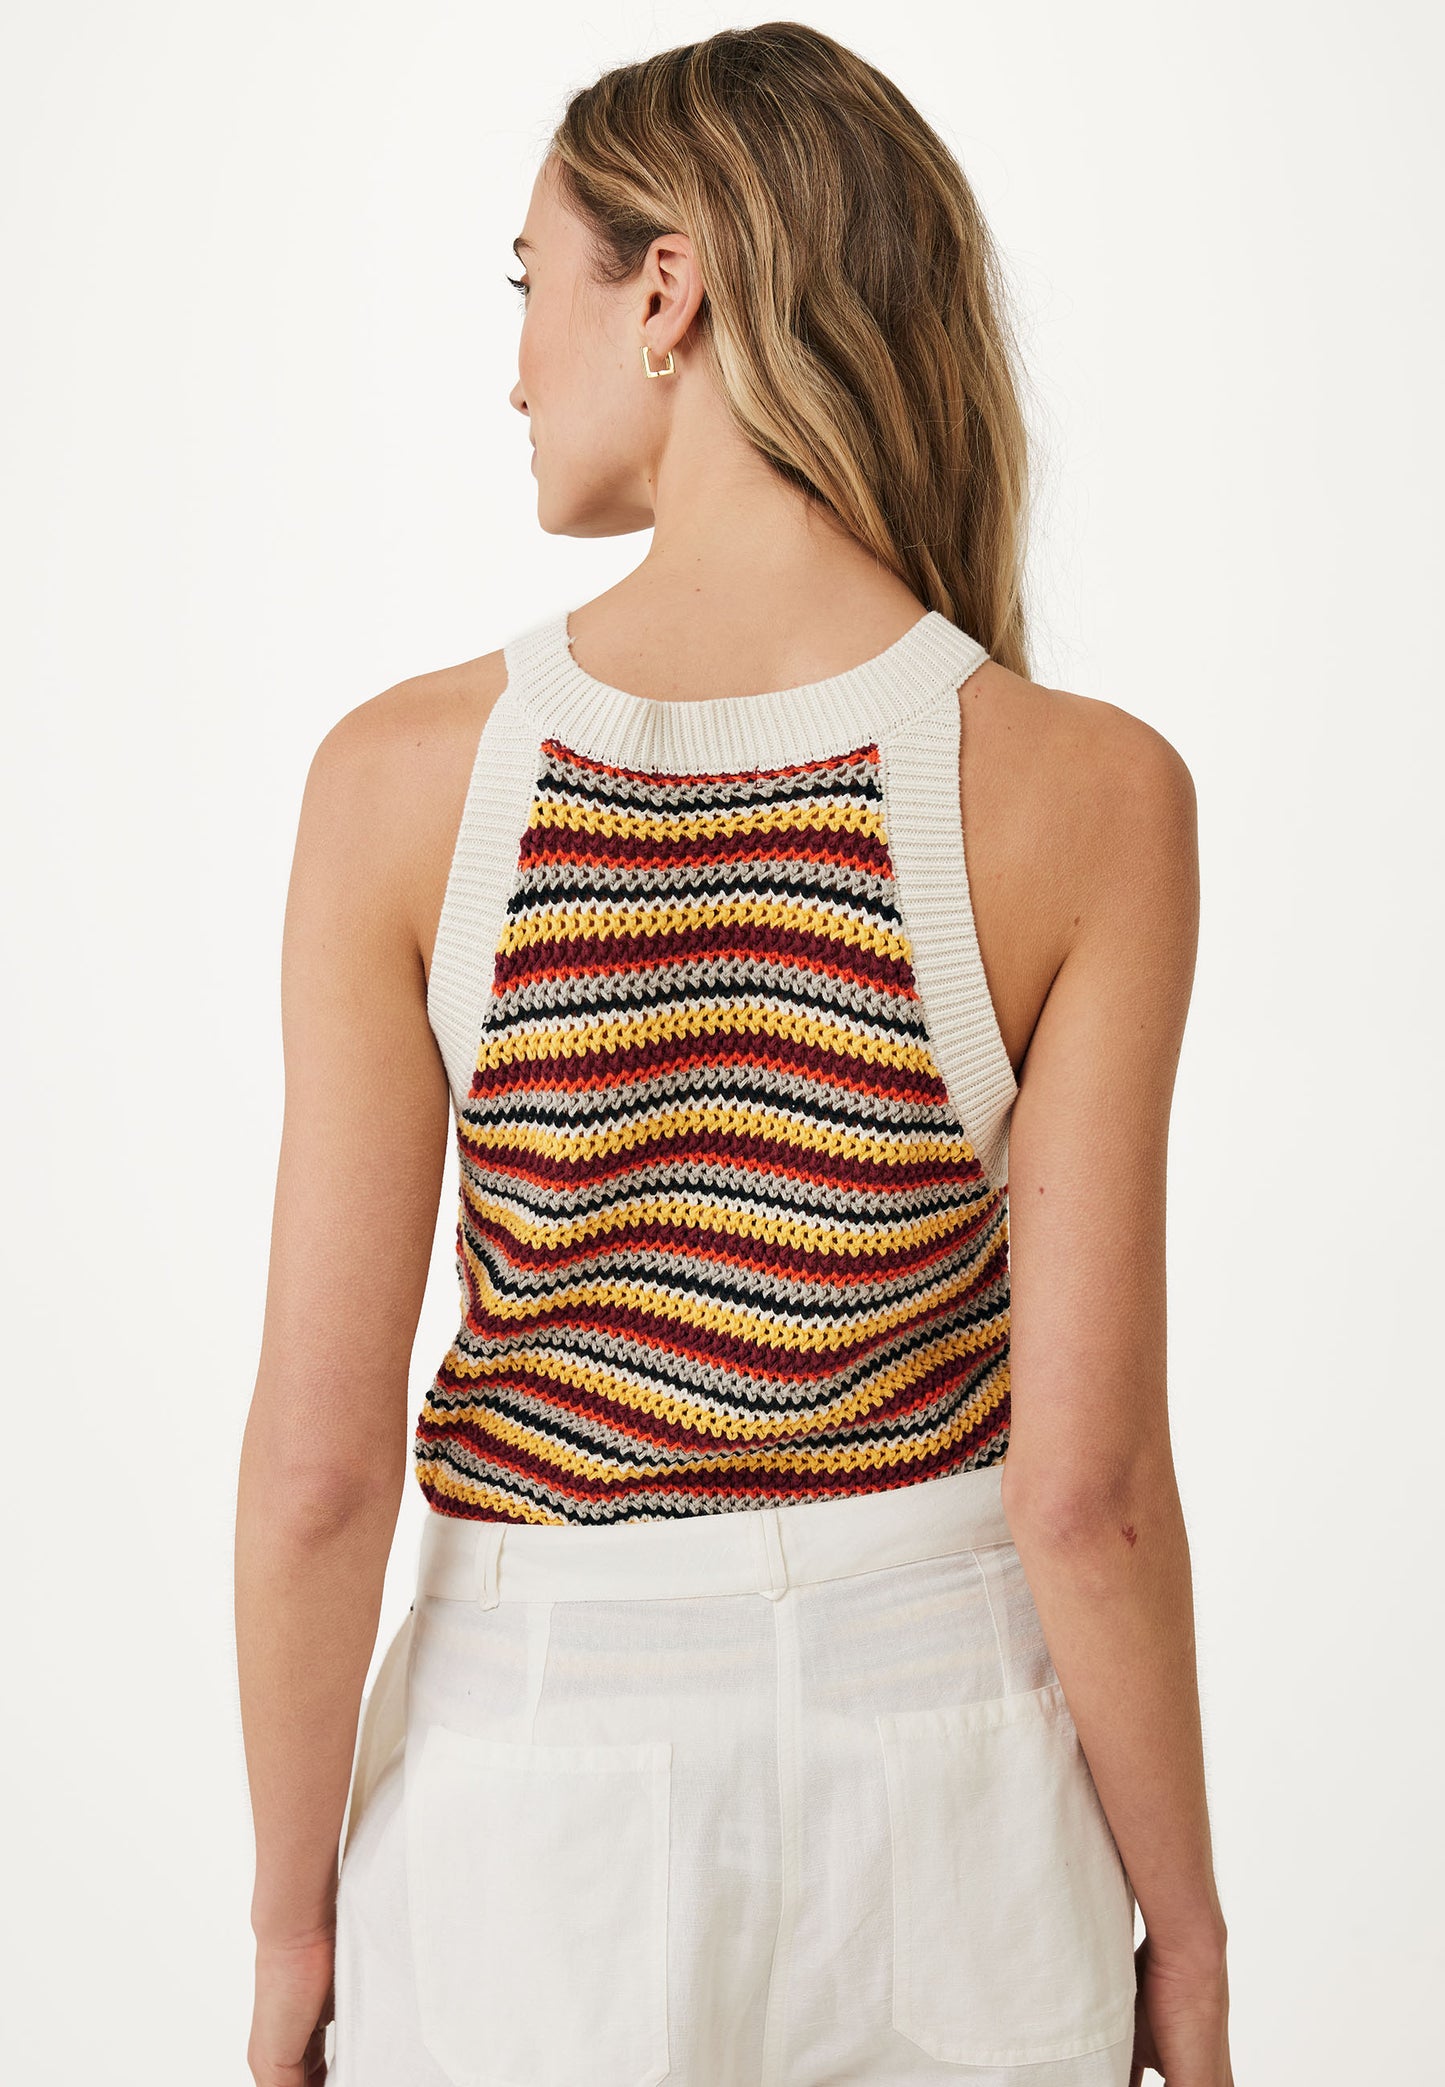 American Style Striped Top